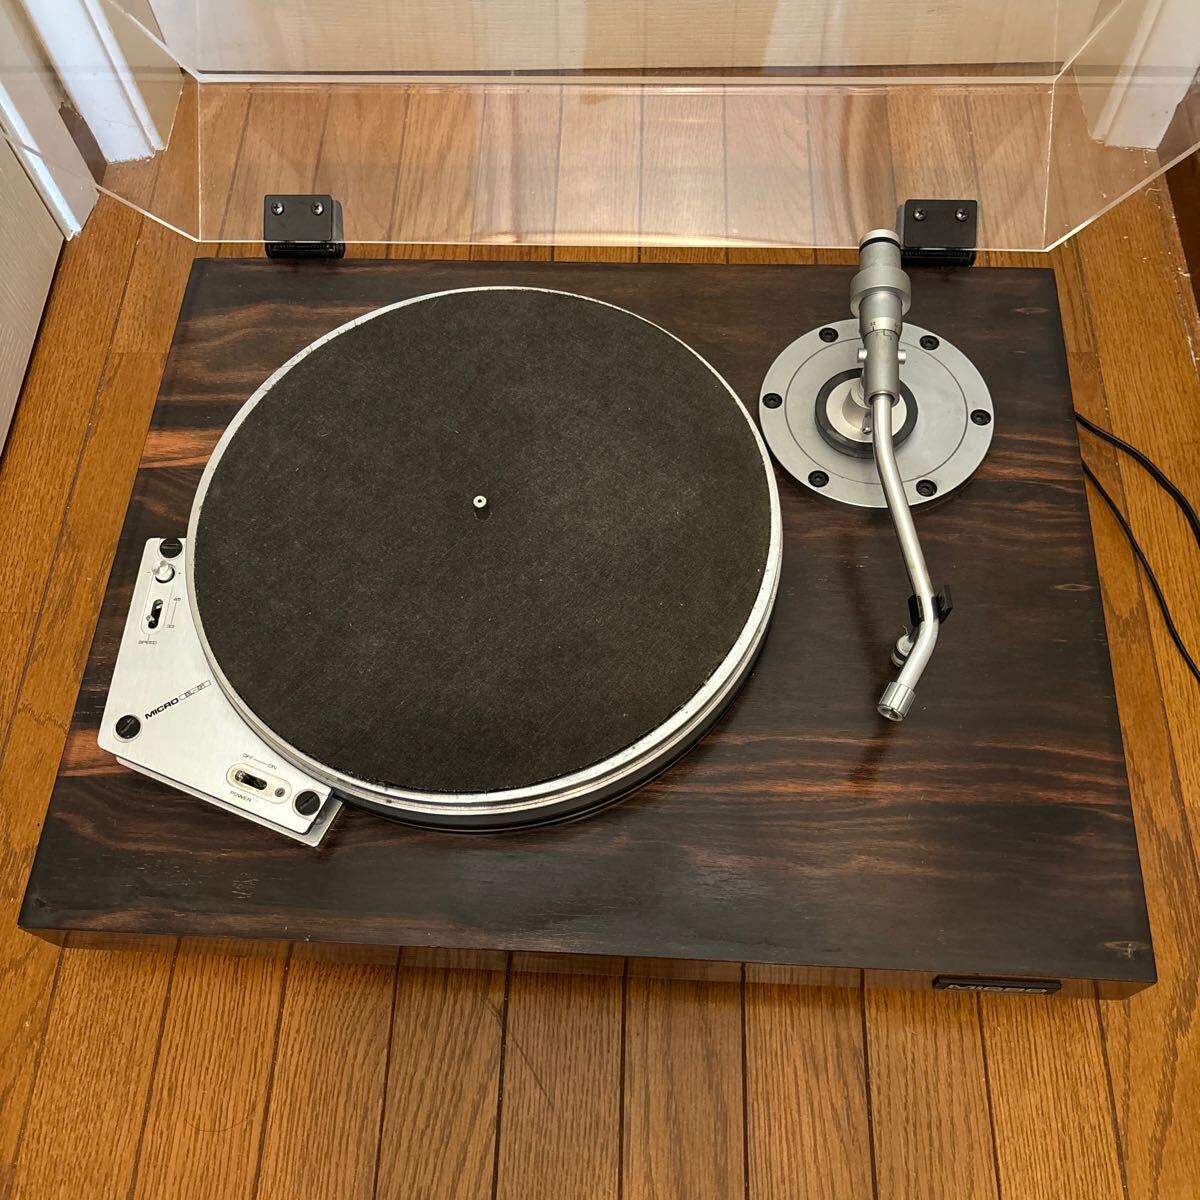  turntable | micro |BL91| used | sound out verification settled / record player |MICRO | belt Drive | micro . machine | name vessel | tone arm attaching 